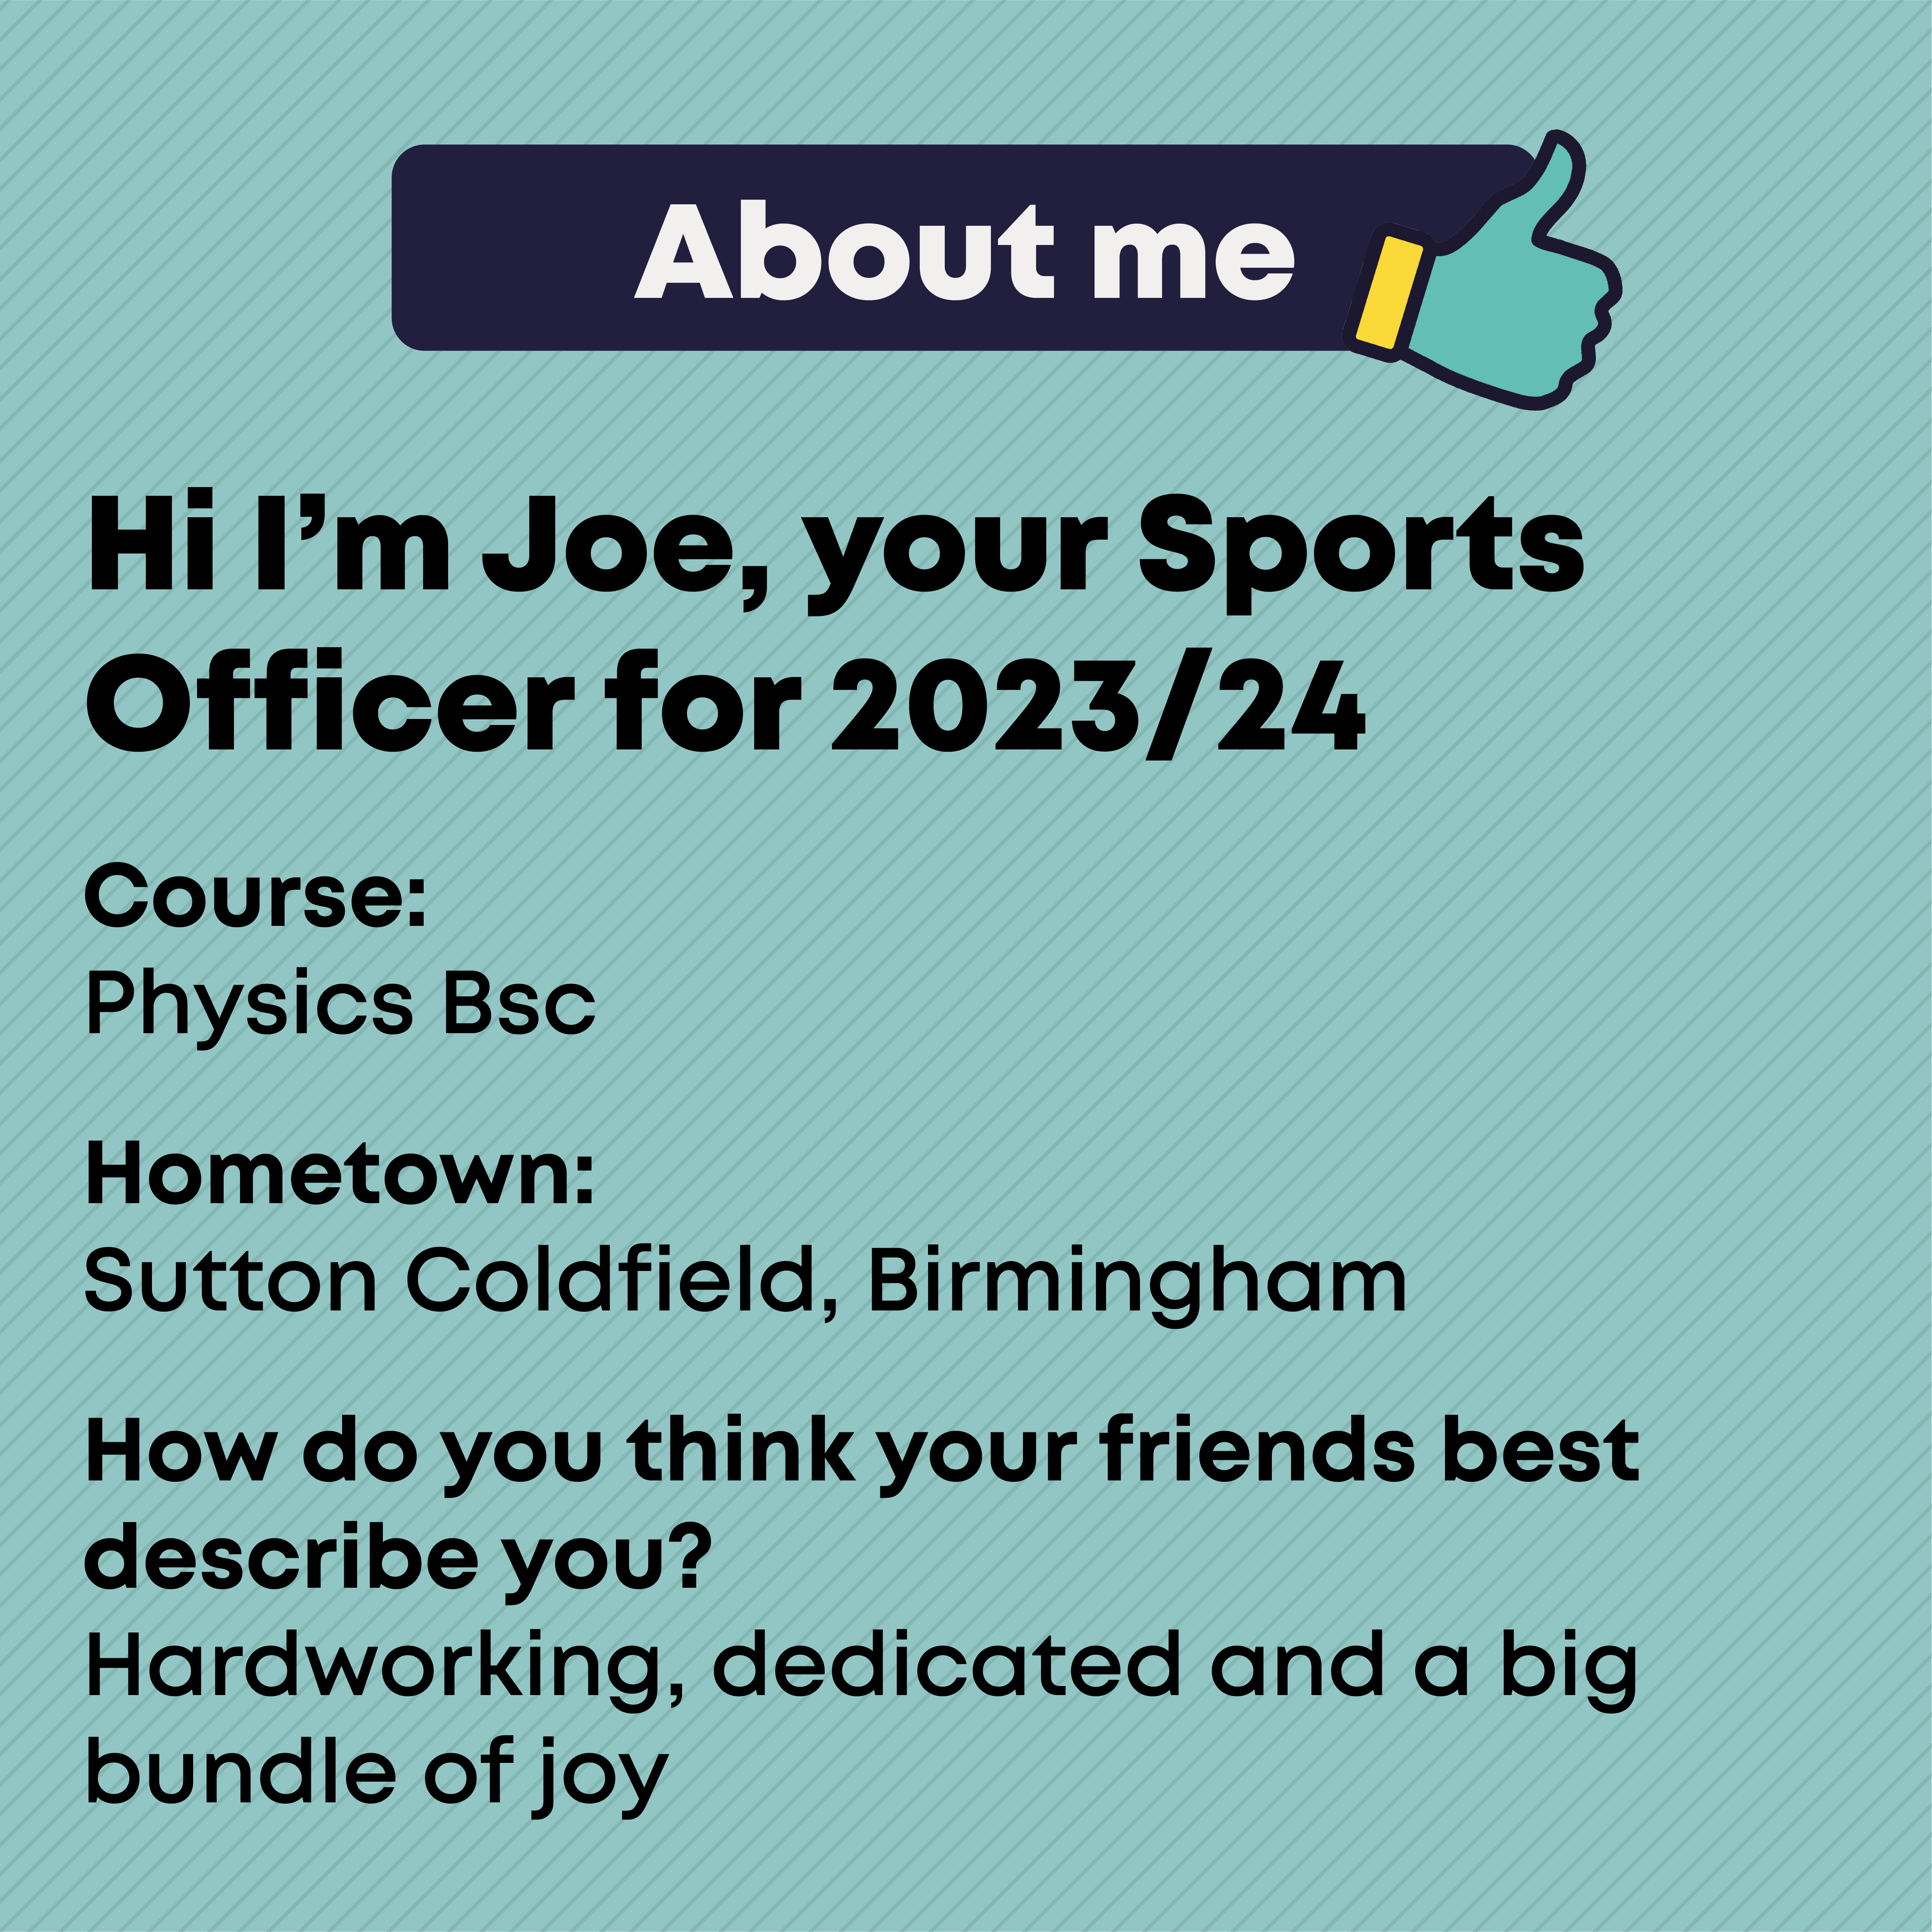 About  Course:   Physics Bsc  Hometown:  Sutton Coldfield, Birmingham  How do you think your friends best describe you?  Hardworking, dedicated and a big bundle of joy